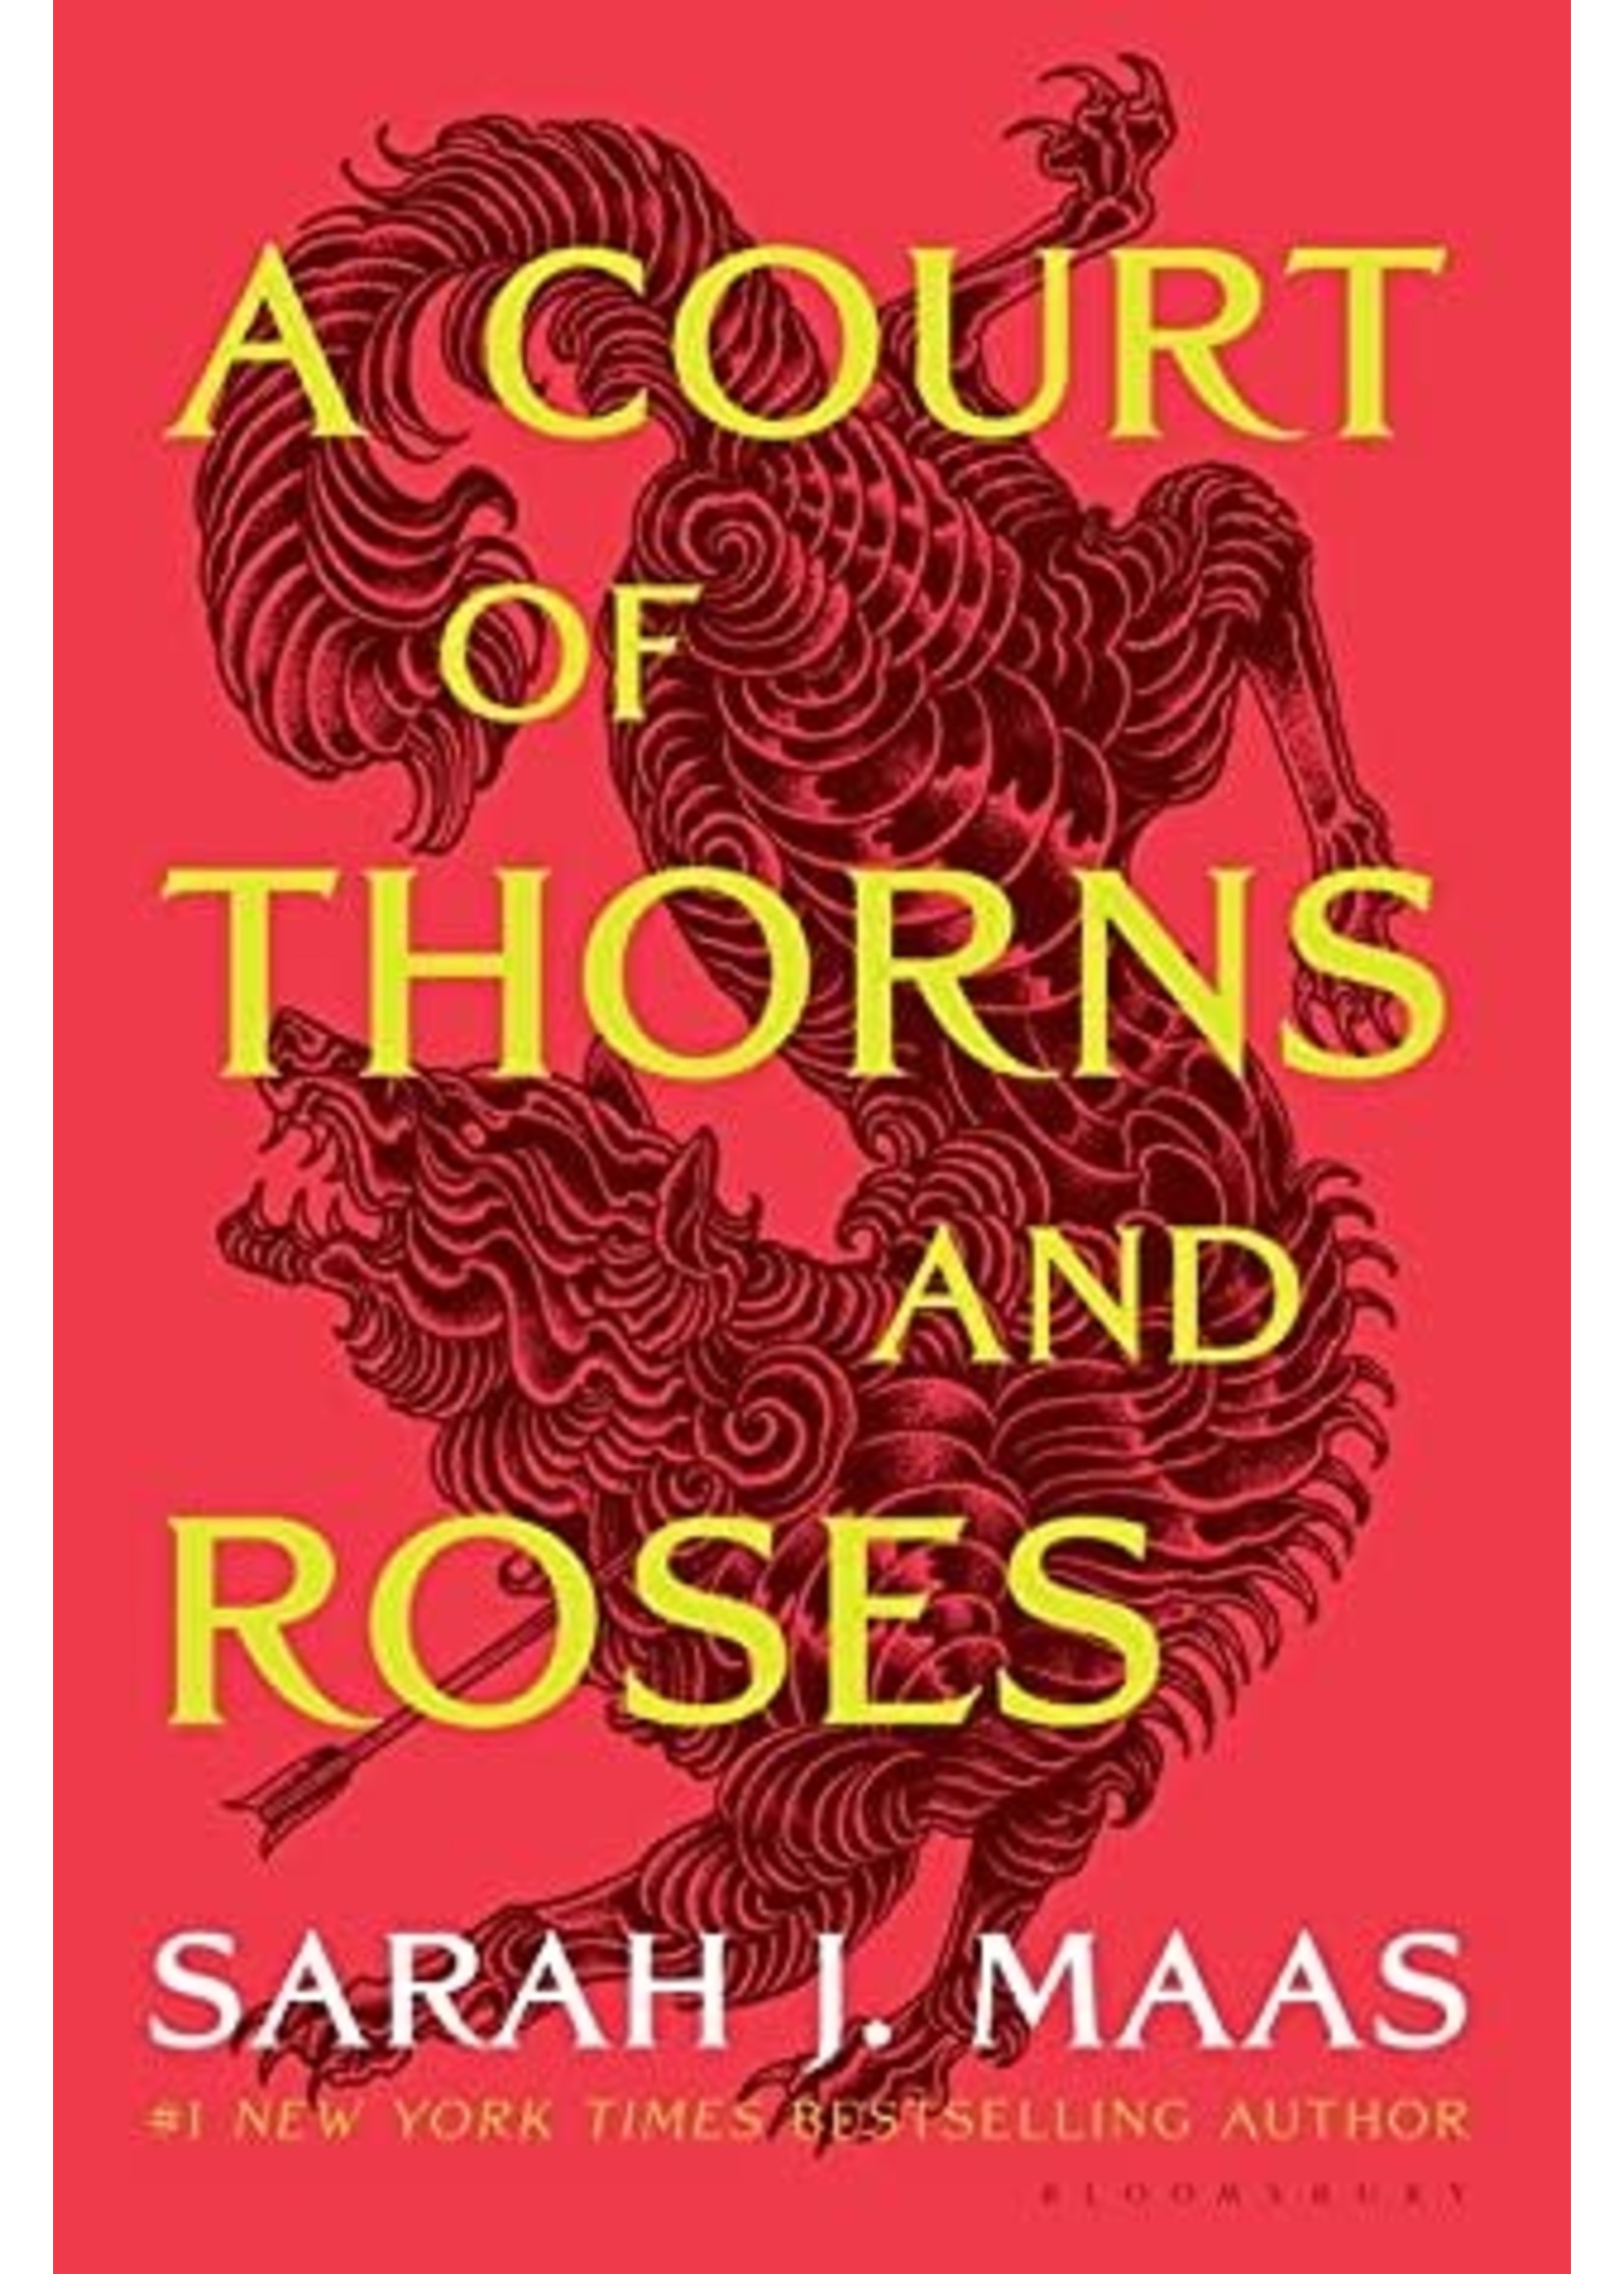 A Court of Thorns and Roses (A Court of Thorns and Roses #1) by Sarah J. Maas